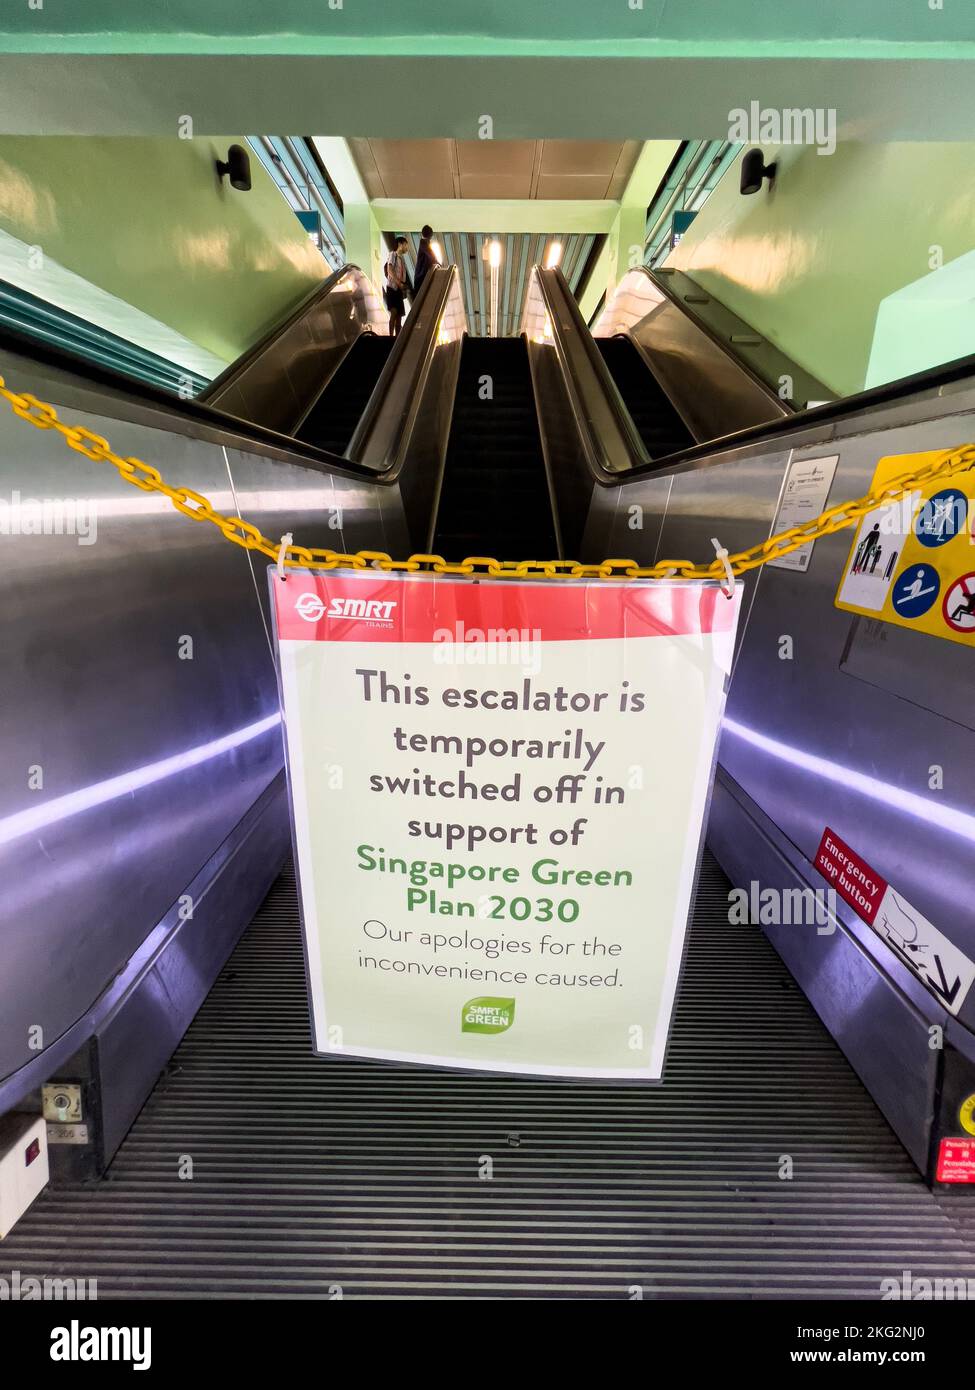 Escalator is closed during non peak hour to save energy for Singapore Green Plan 2030. A nation movement on sustainable development. Stock Photo